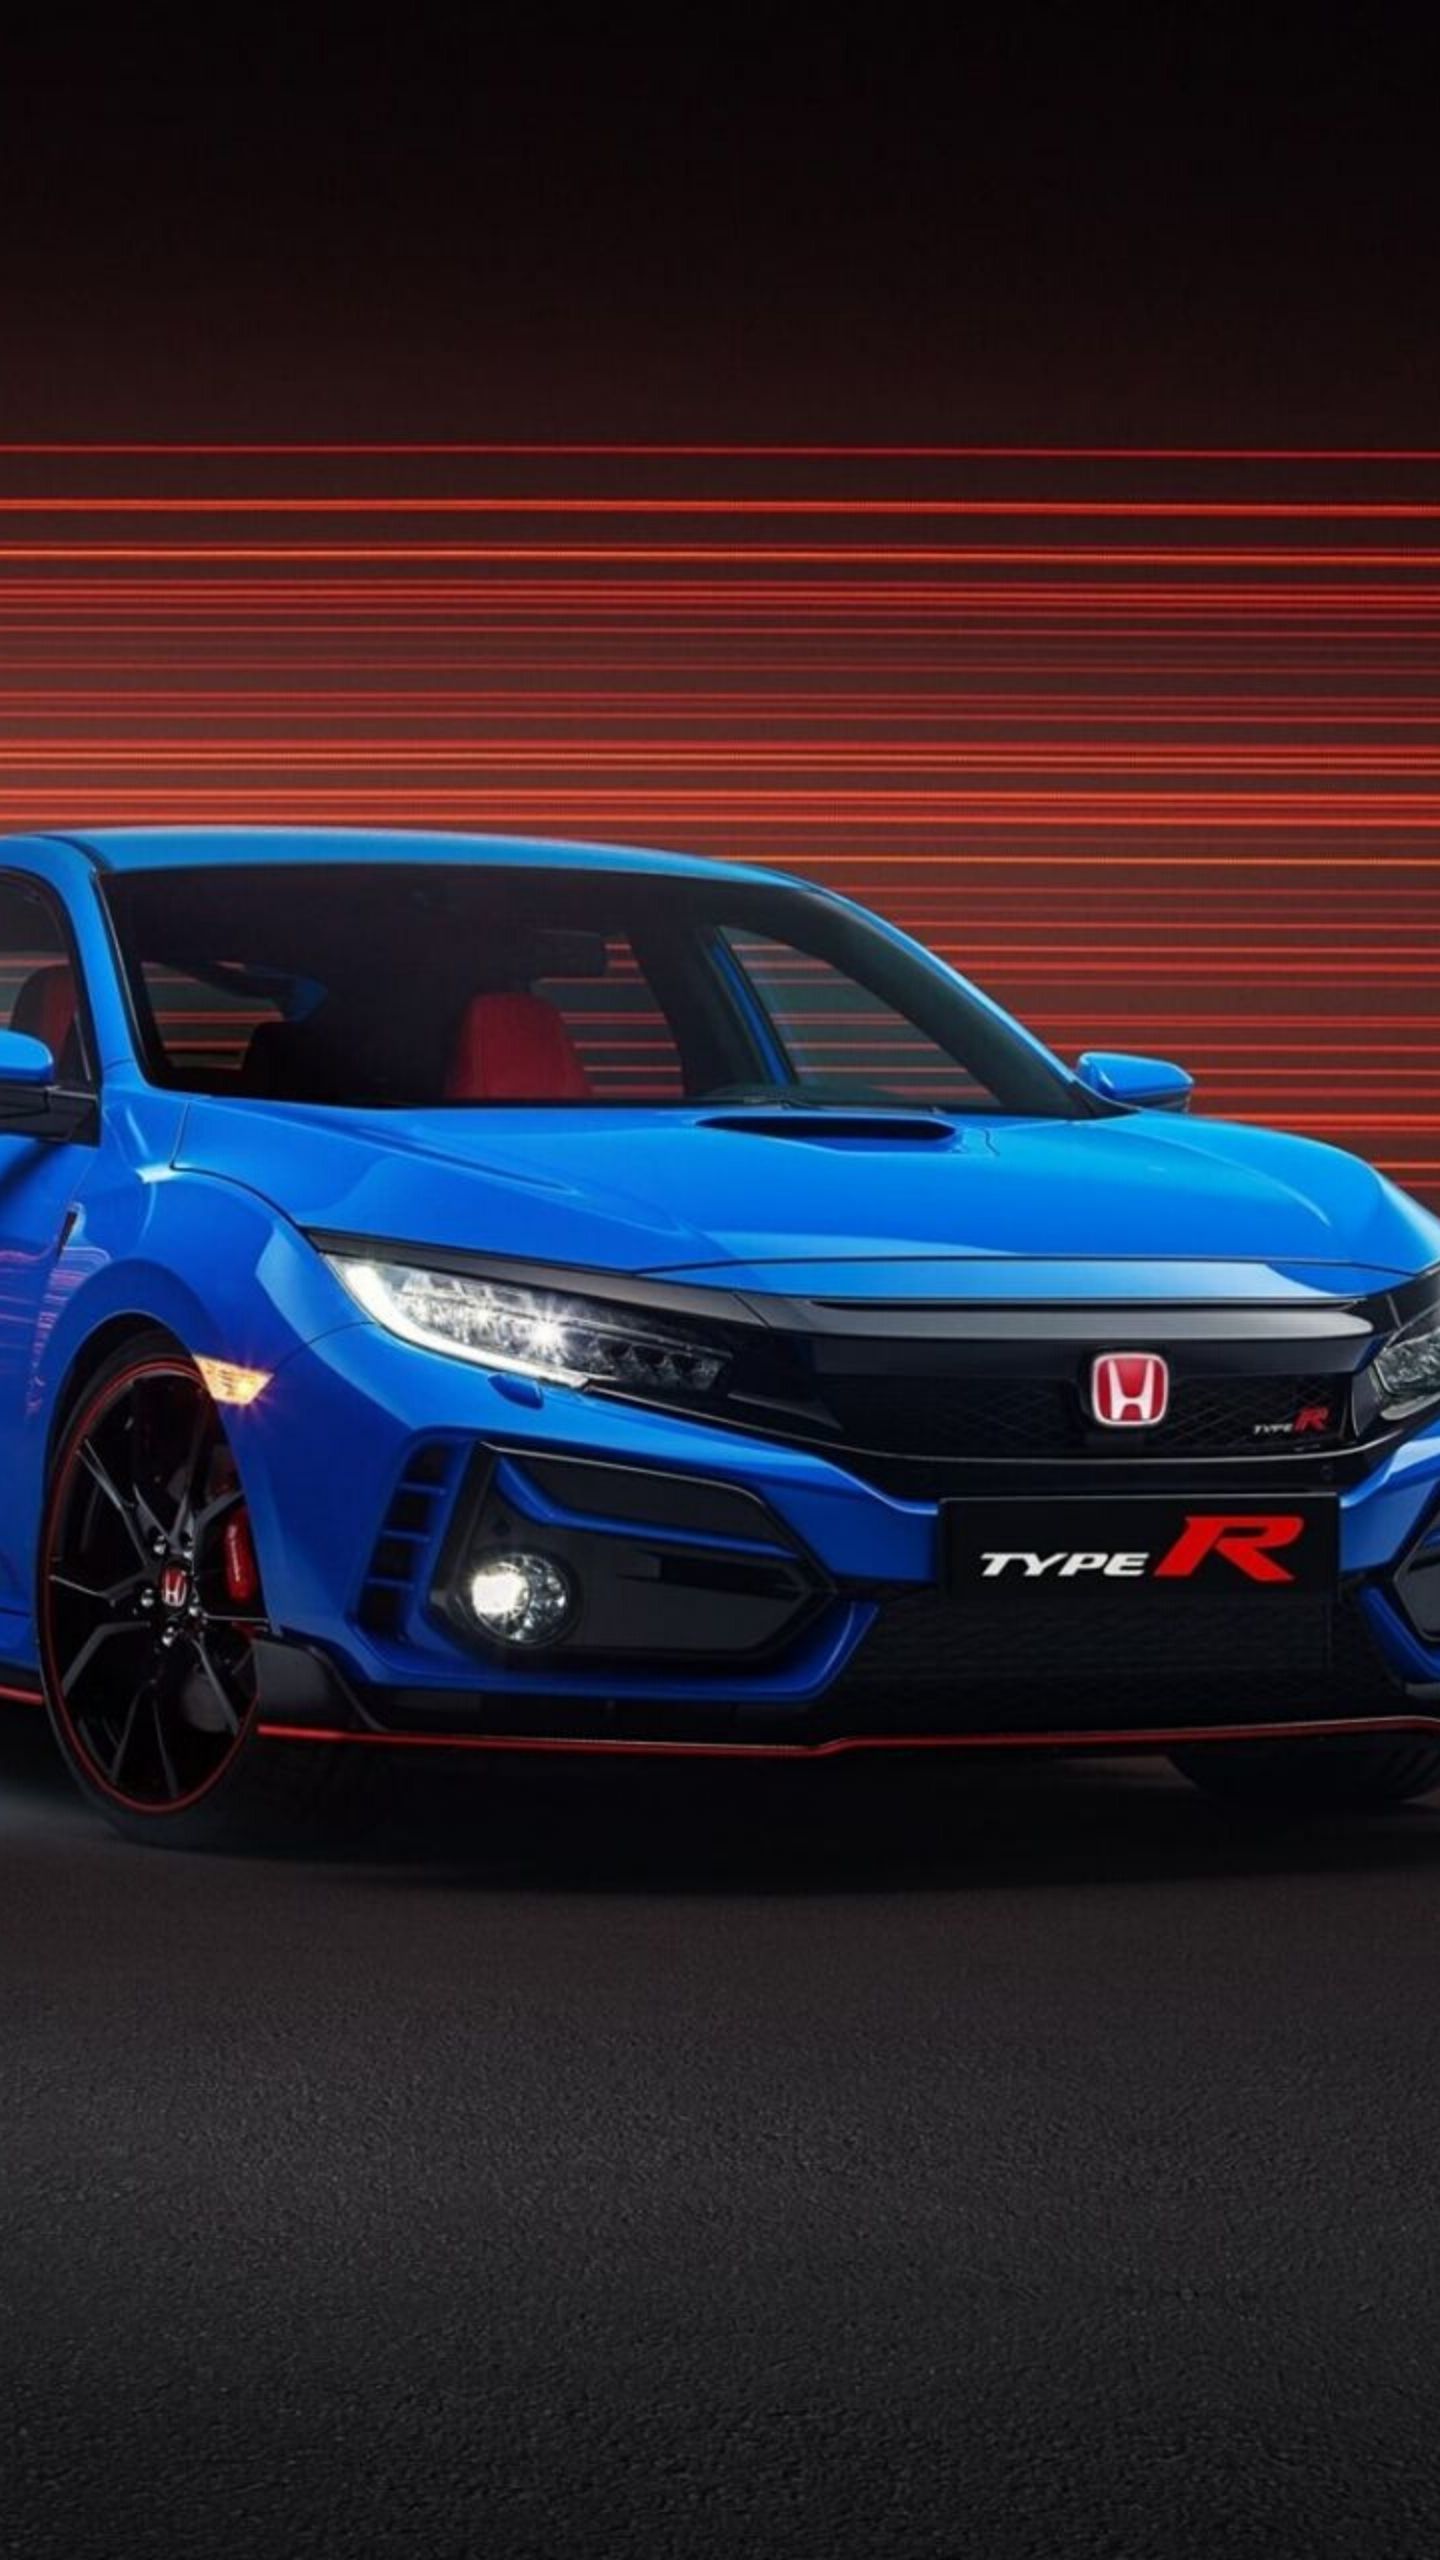 Type R Limited Edition Sportiest Civic Honda Engine Room